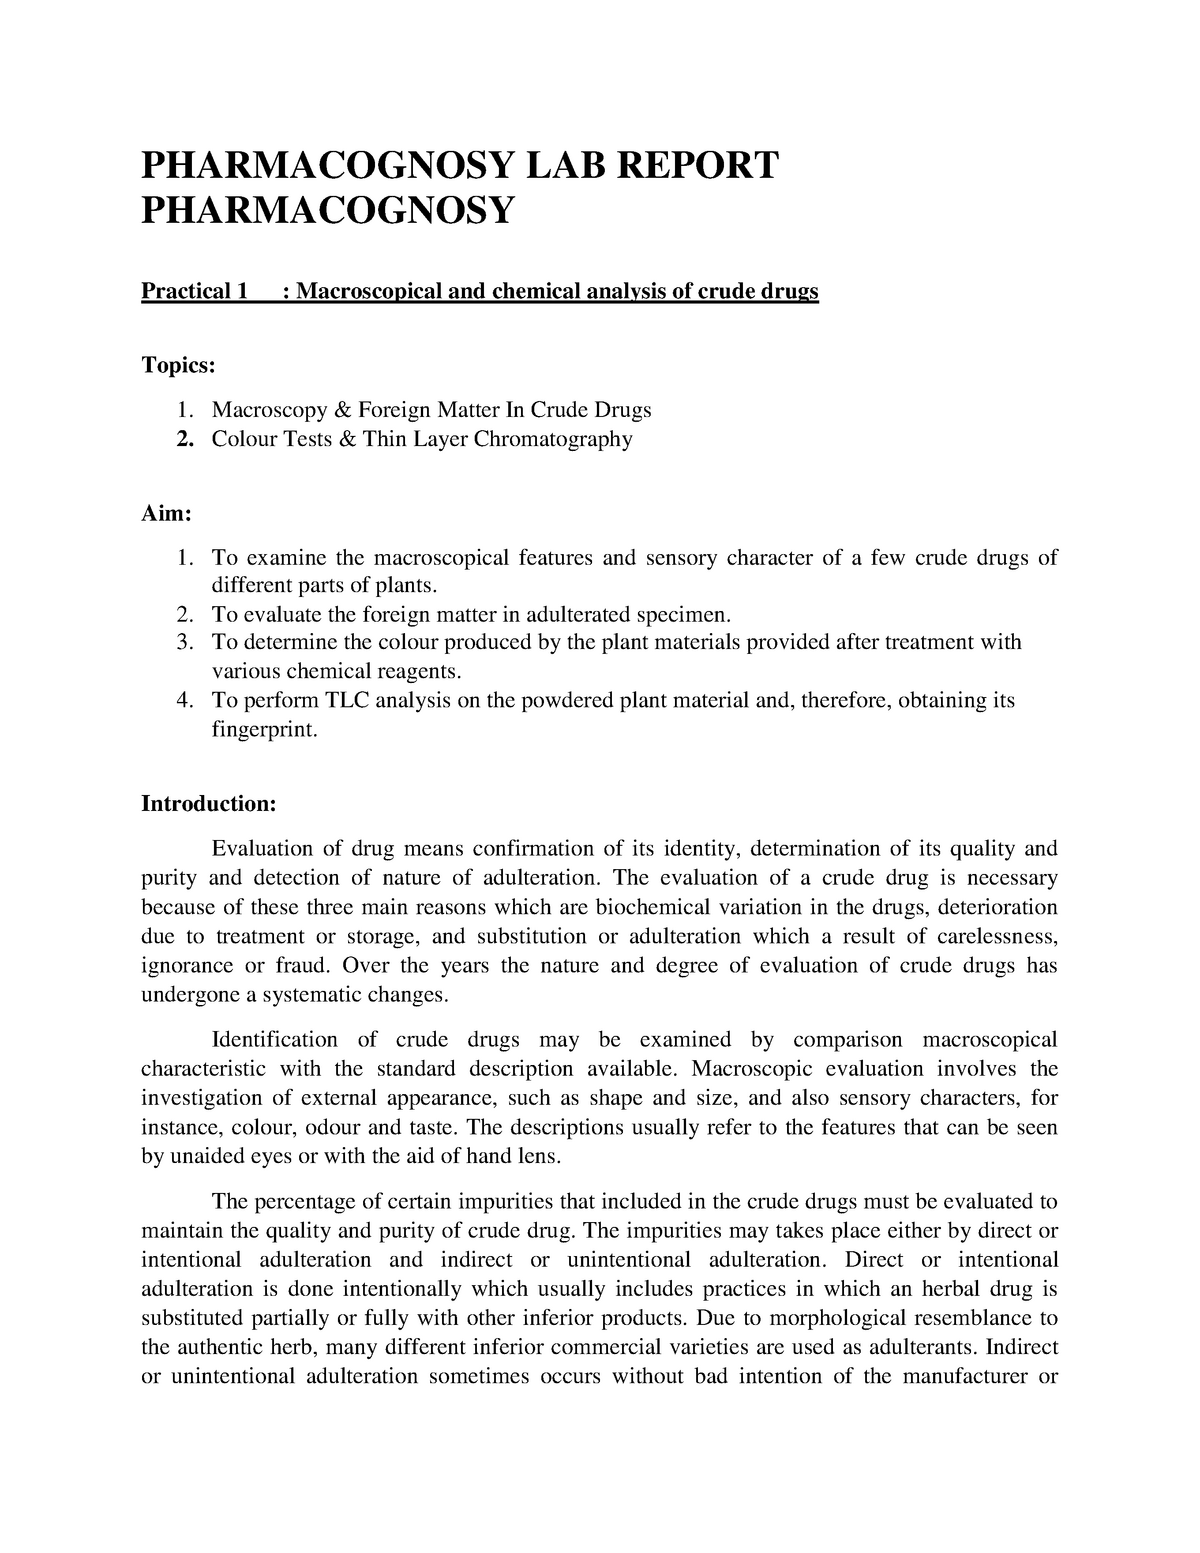 research paper of pharmacy